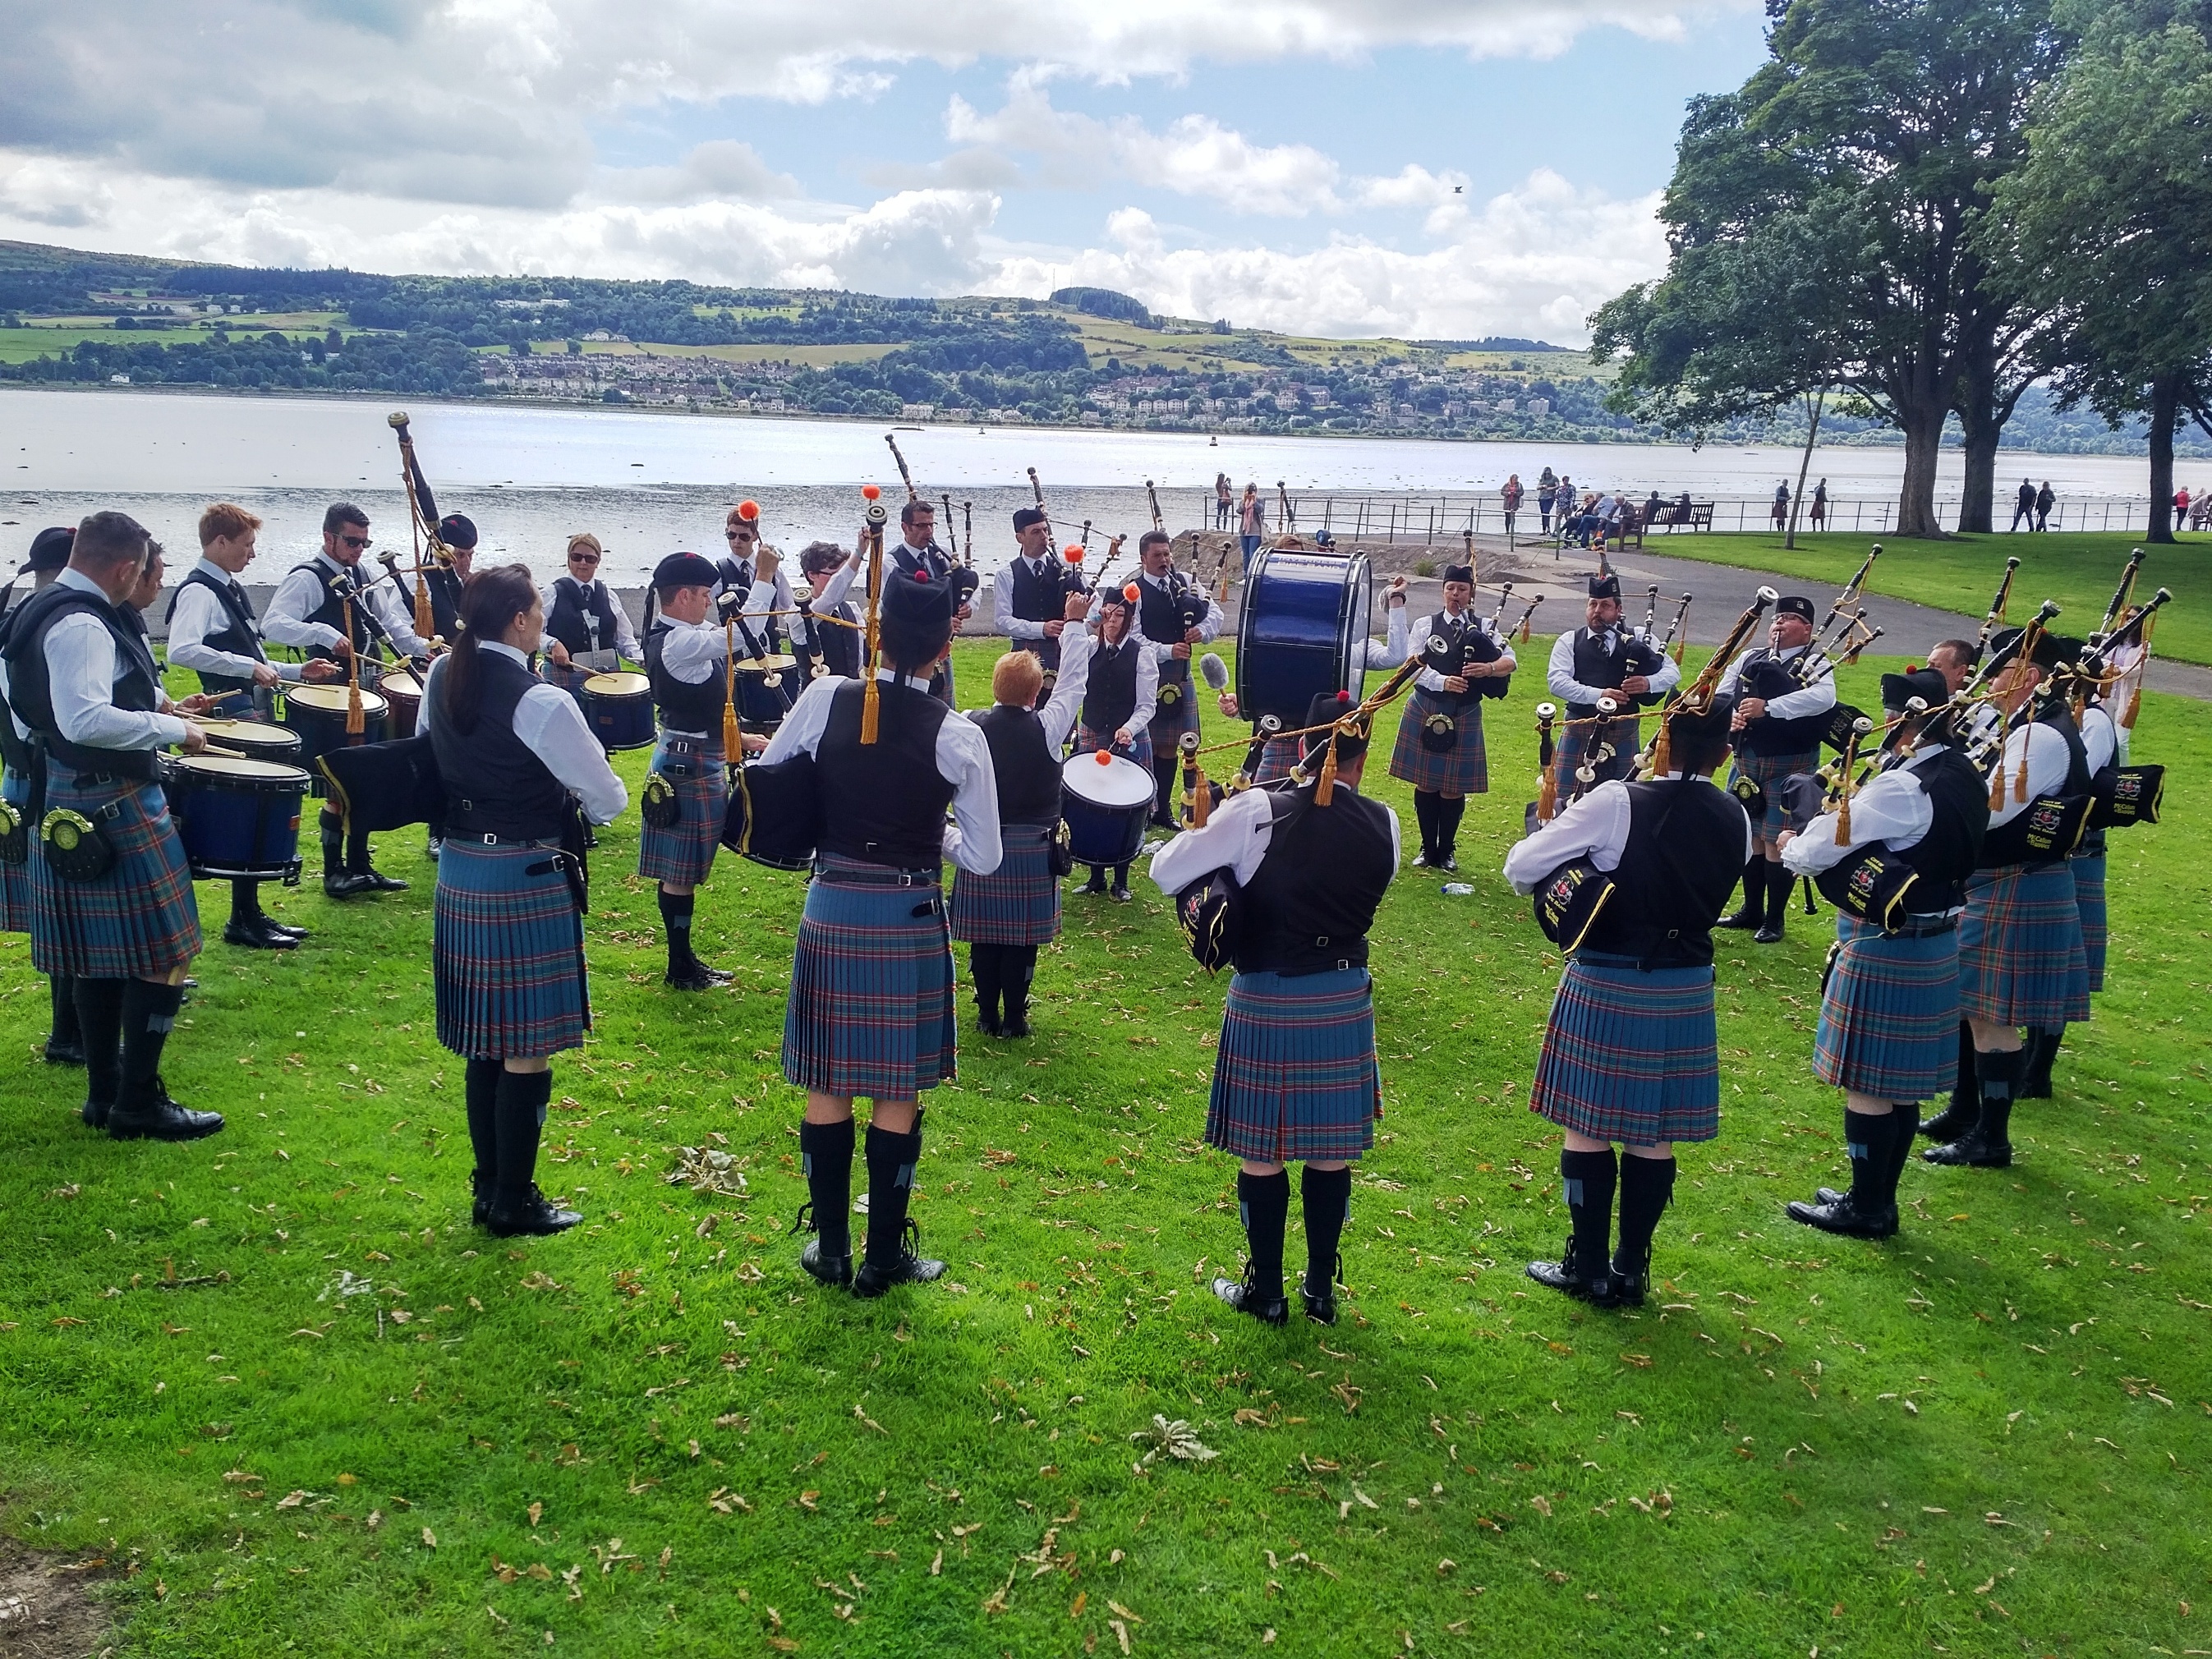 City of Inverness Pipe Band playing on the seafront at Dumbarton